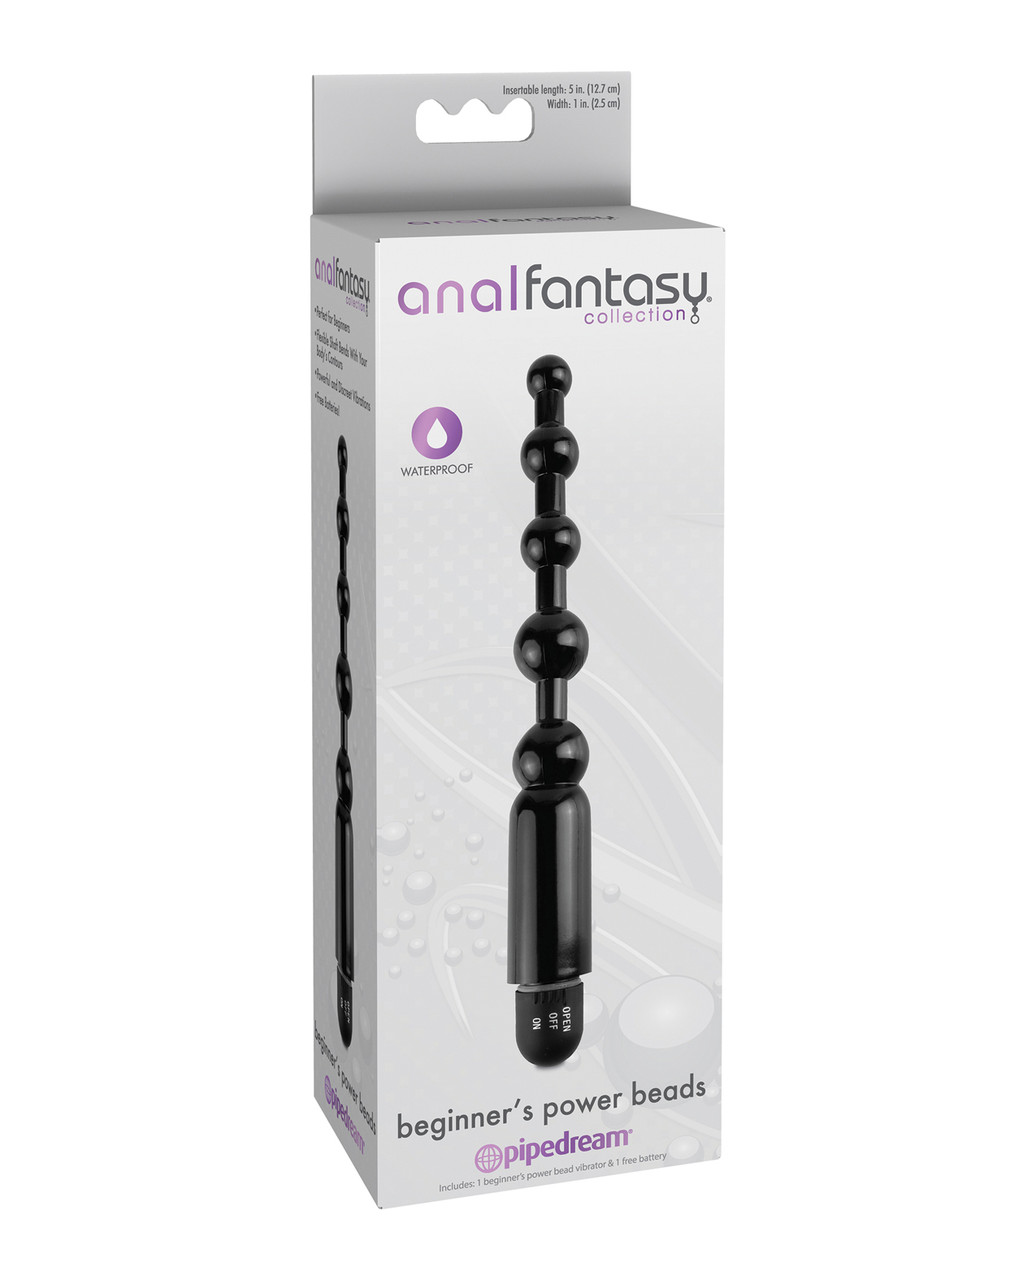 anal fantasy  PIPE465723 / 6886